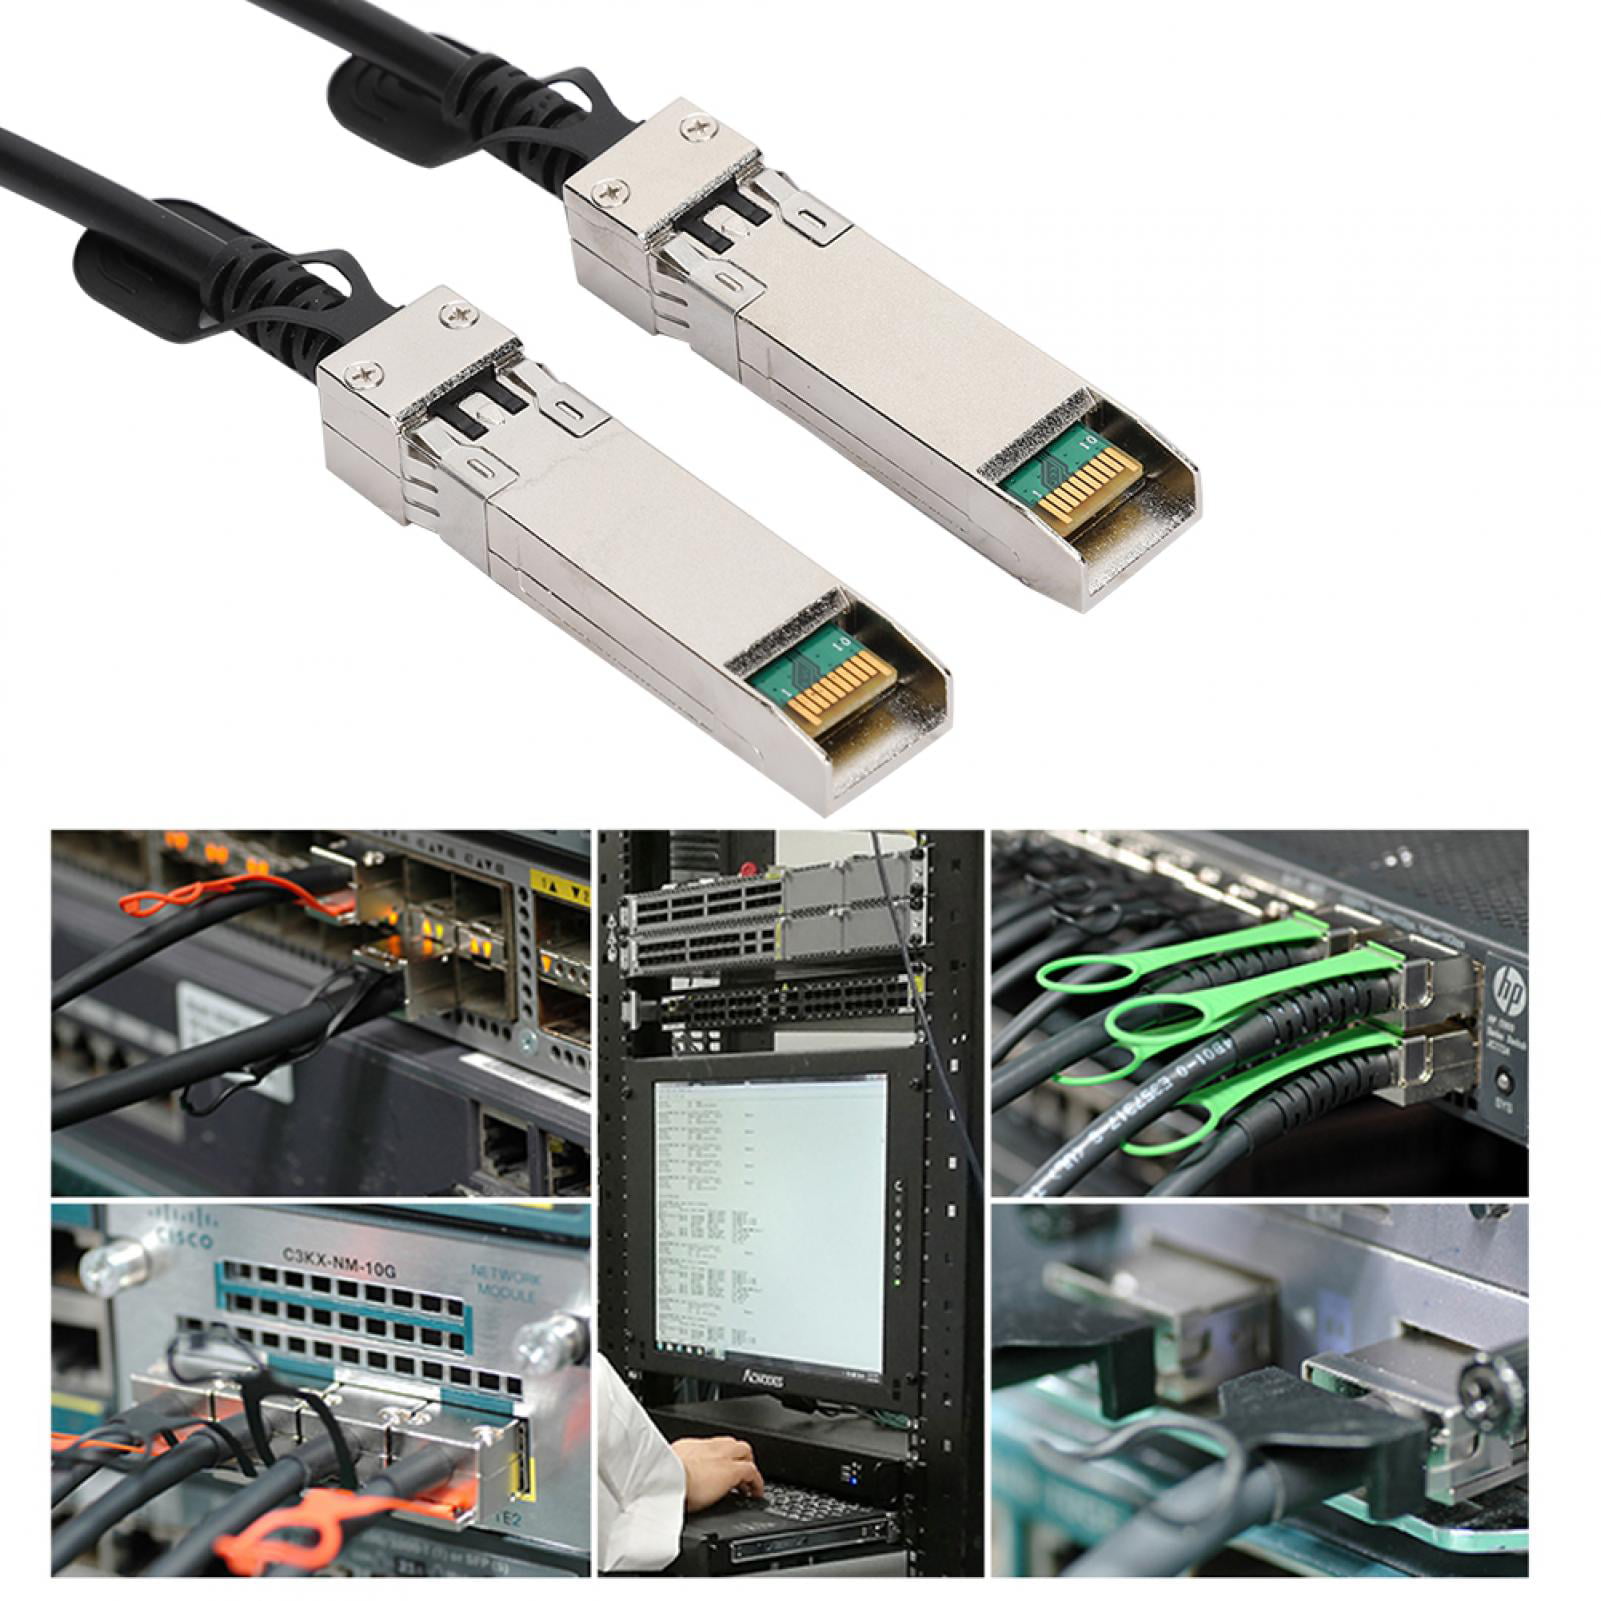 1 Meter Flexible Router Cable SFP Cable 25Gbps Exchanger for Routers Firewalls Network Cards Transceivers 